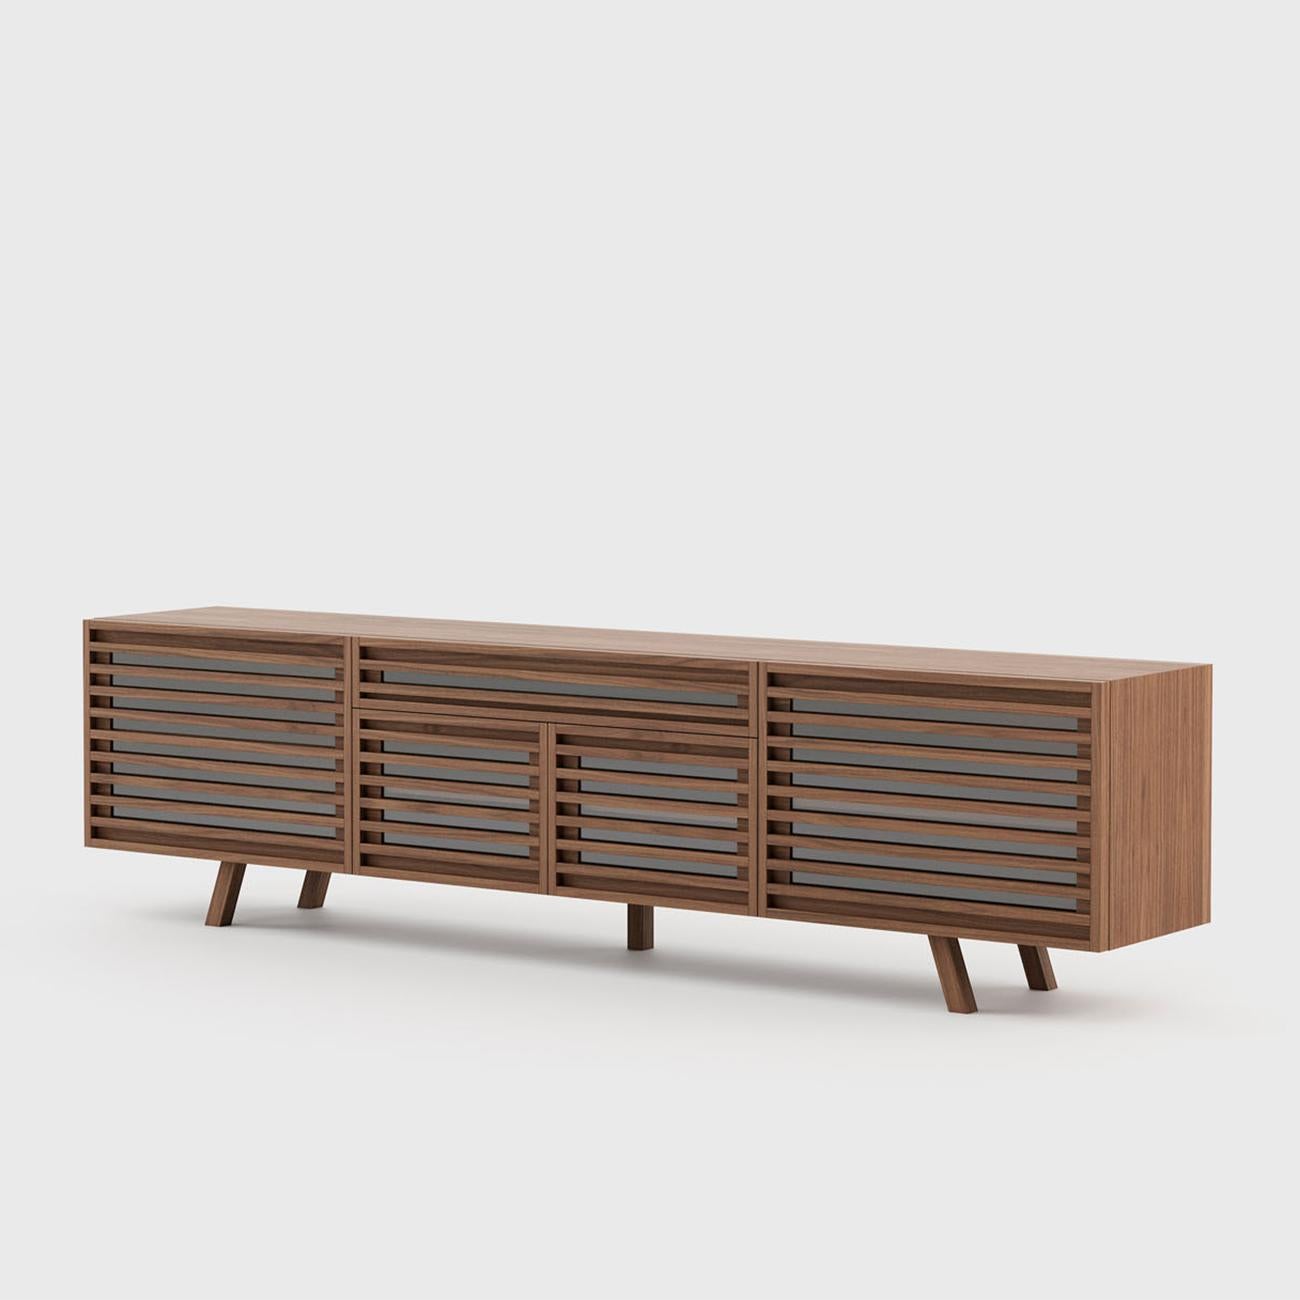 Sideboard Blind TV with structure in walnut veneer wood
in matte finish. With 5 wooden feet, with 4 doors with wooden
blinds and with clear glass behind the blinds on each door. Each
case include a shelf.
  